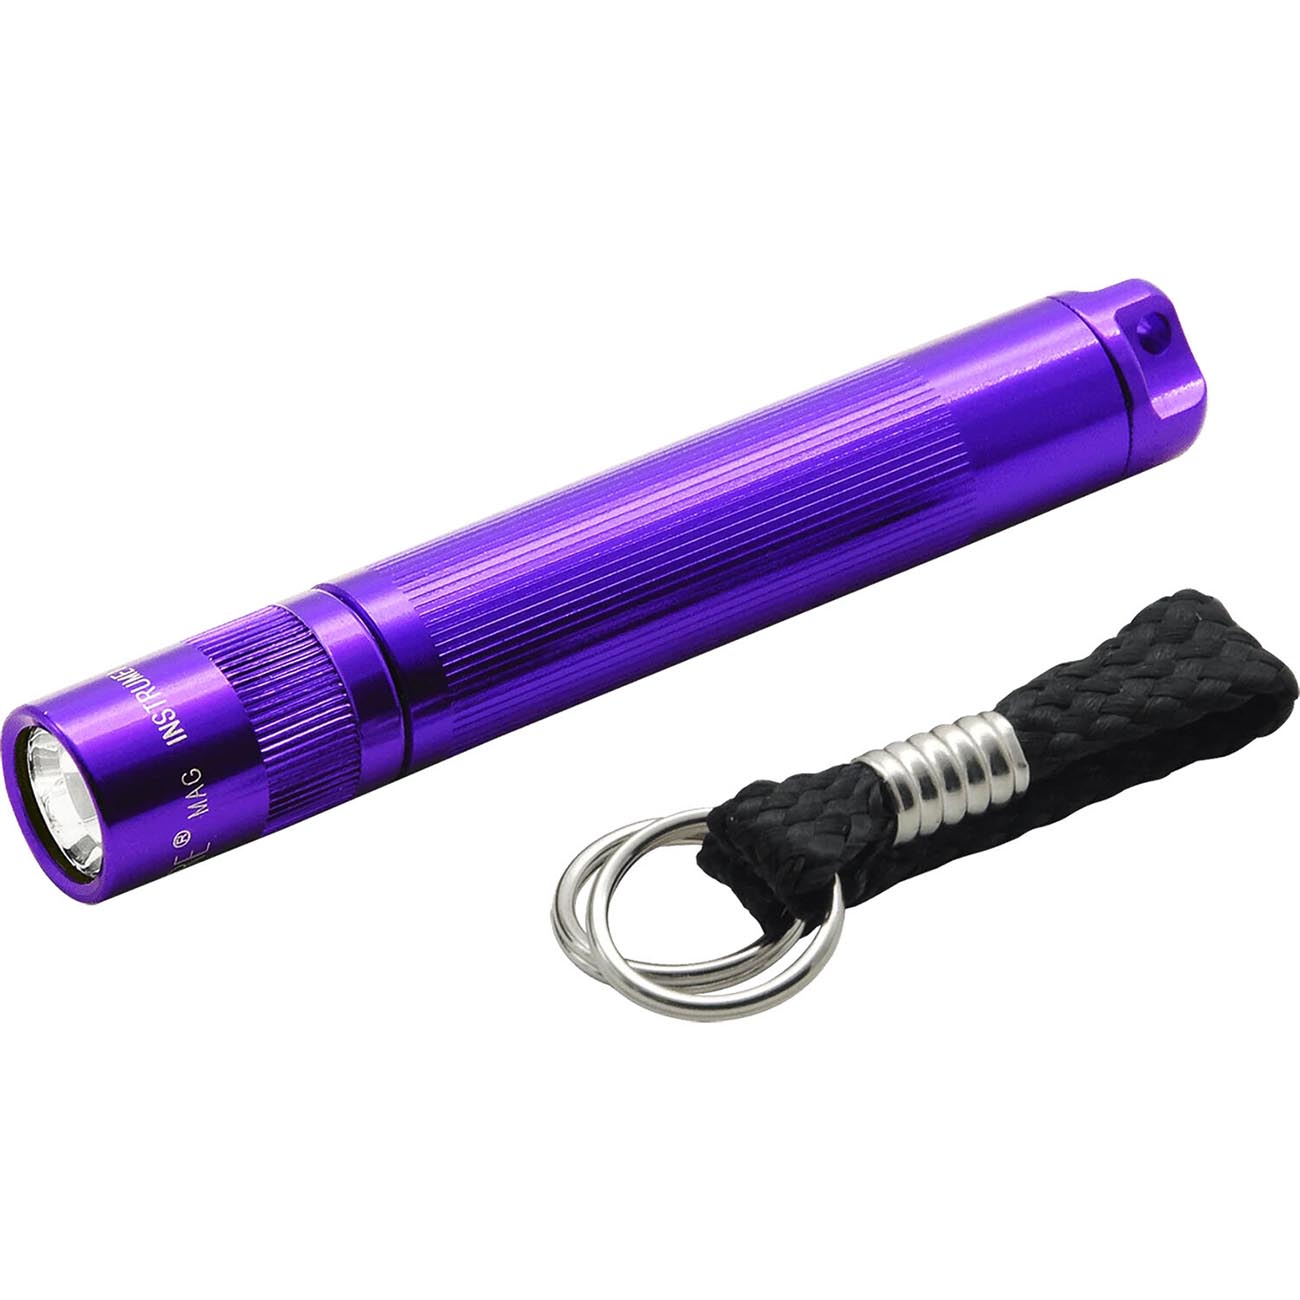 Maglite Solitaire 1-cell Aaa Incandescent Flashlight (purple Clamshell Packaging)